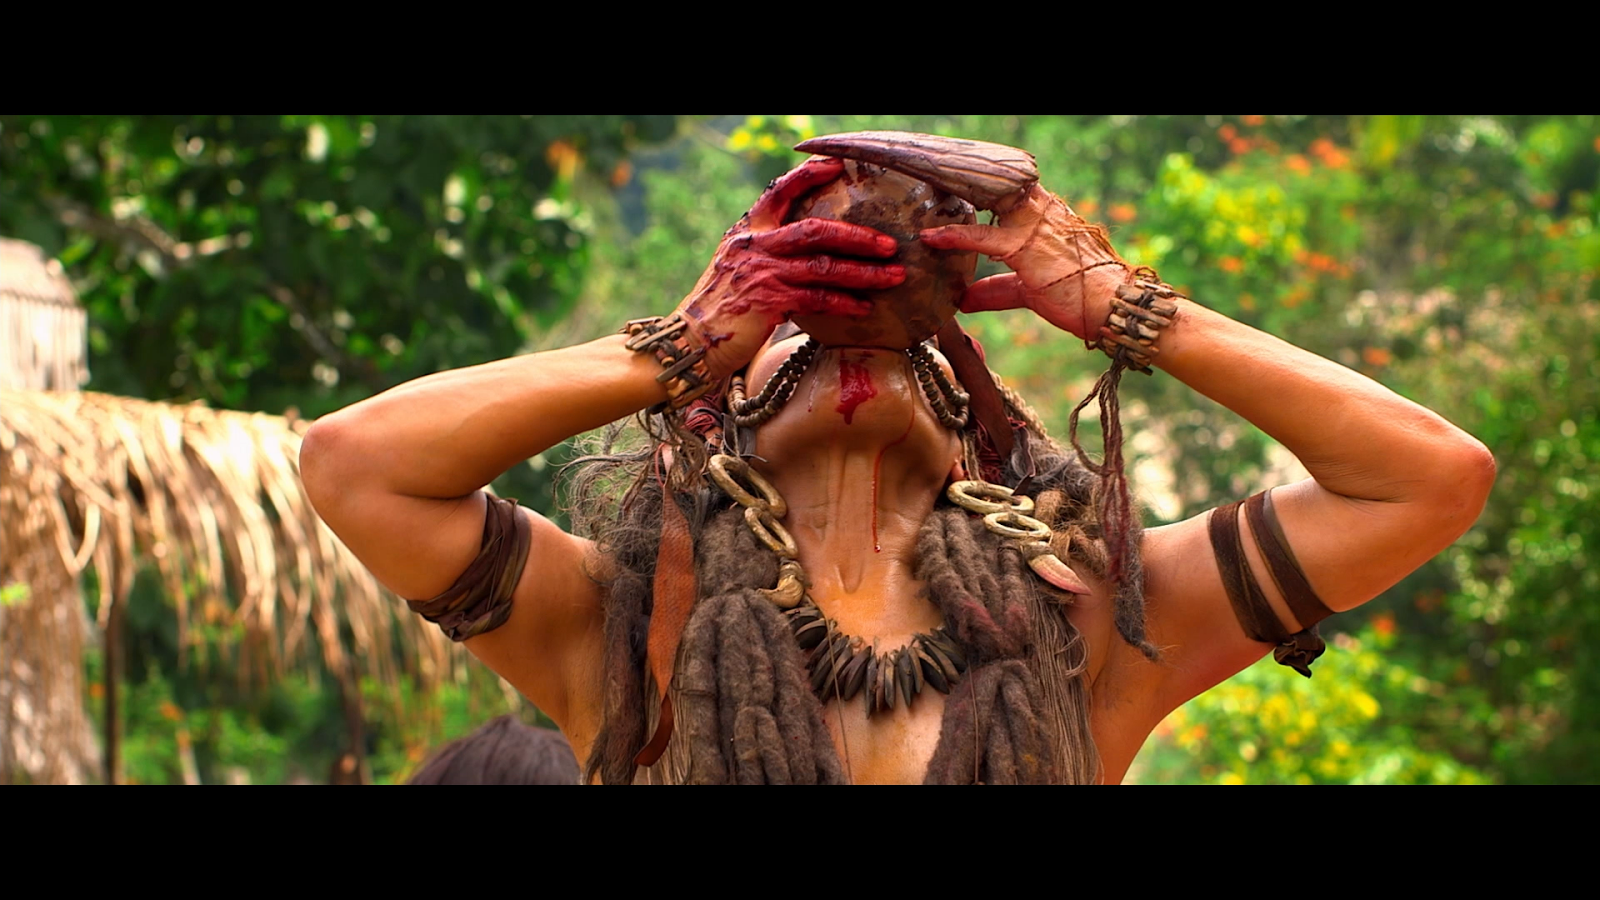 THE GREEN INFERNO (2013) 8